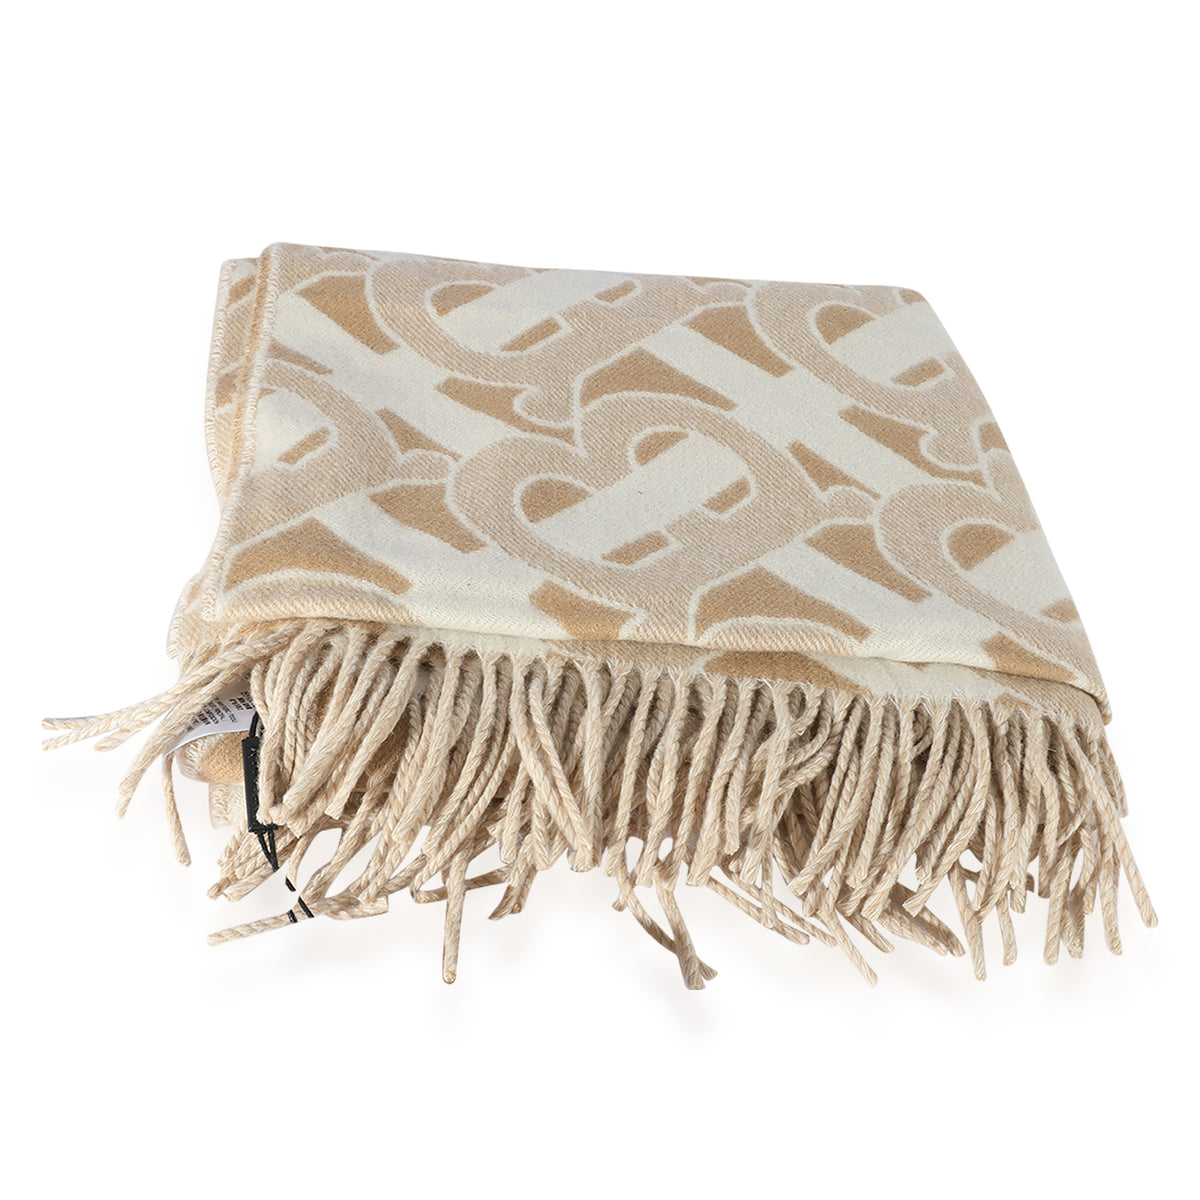 Reviewed by Emm: Luxury Scarves (Alexander McQueen, Burberry, Louis Vuitton)  - Styled by Emm